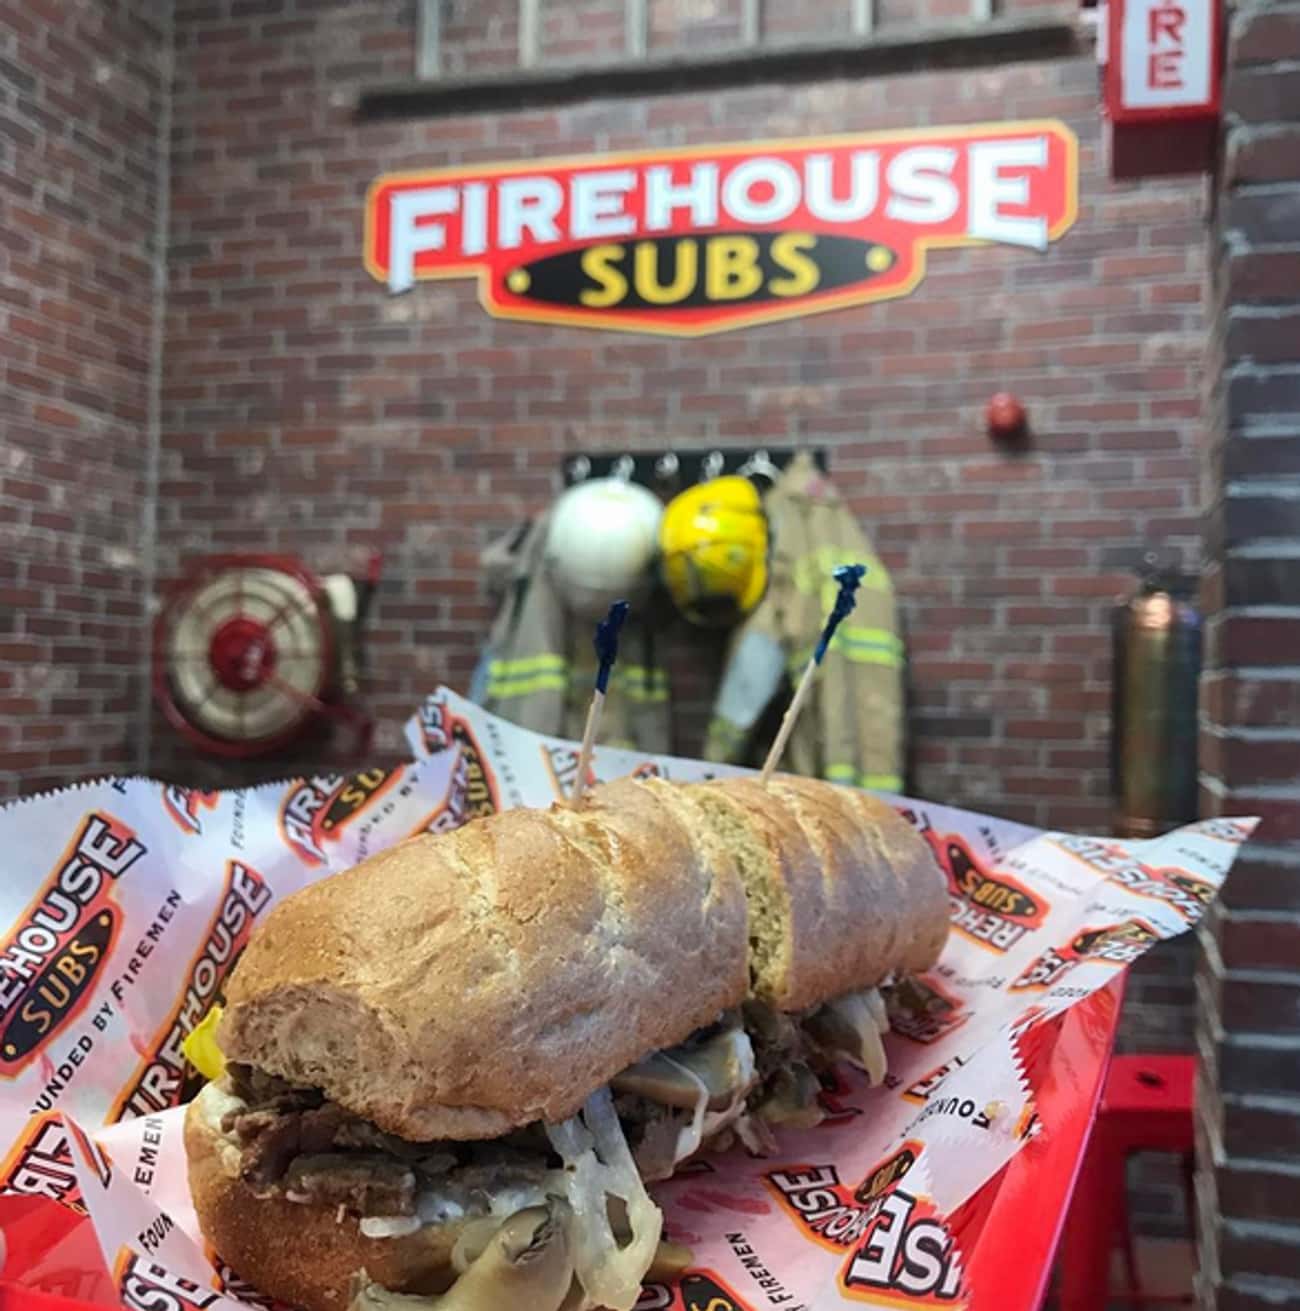 Pick Up A Free Sandwich At Firehouse Subs